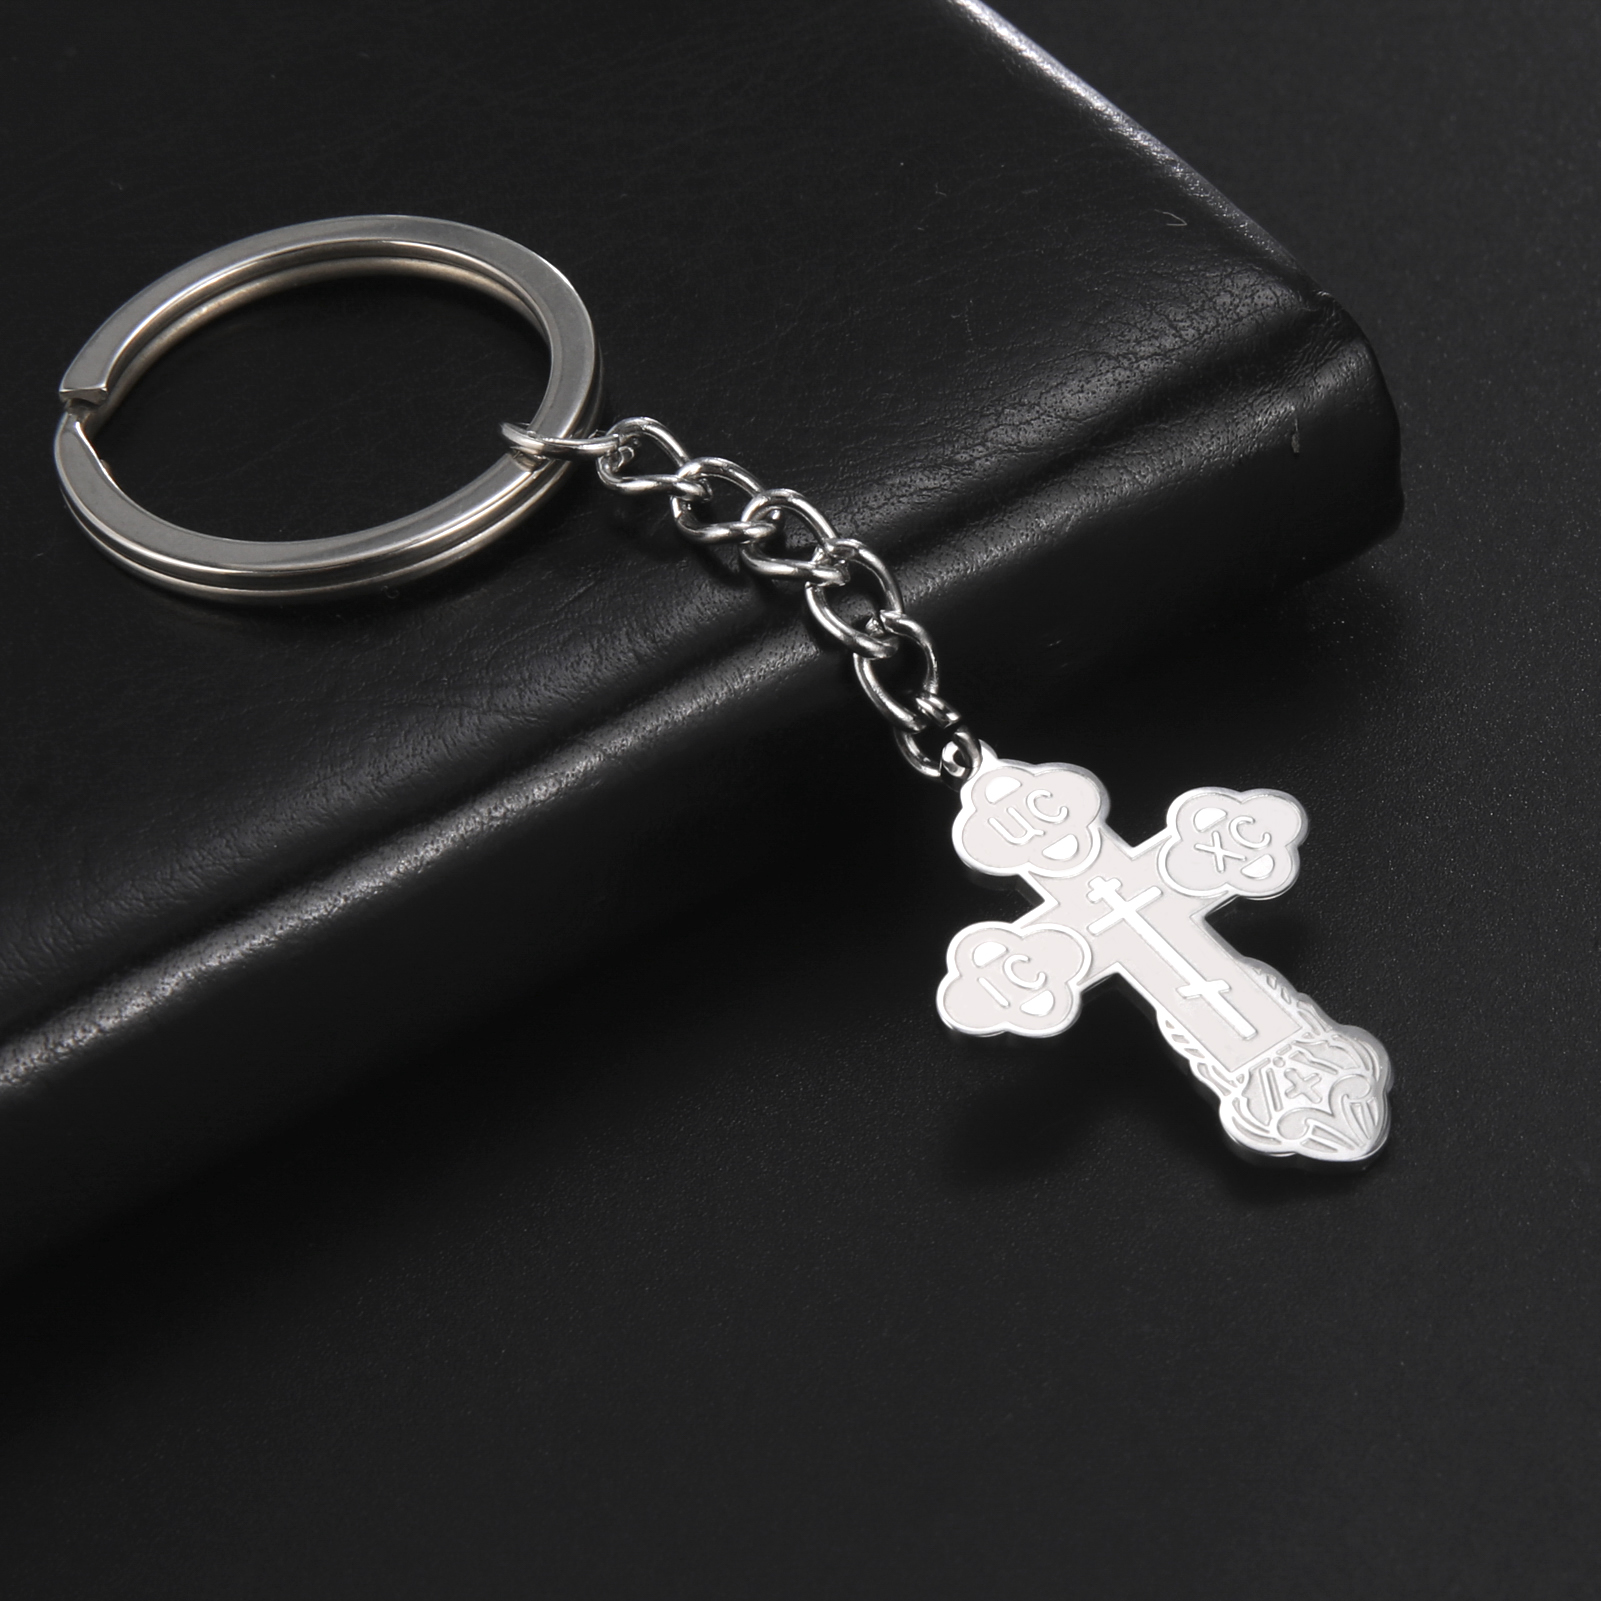 Stainless Steel Orthodox Cross Keychain Christian Religious Beliefs Key  Chains For Women Men Punk Simple Jewelry Christmas Gifts, Free Shipping,  Free Returns